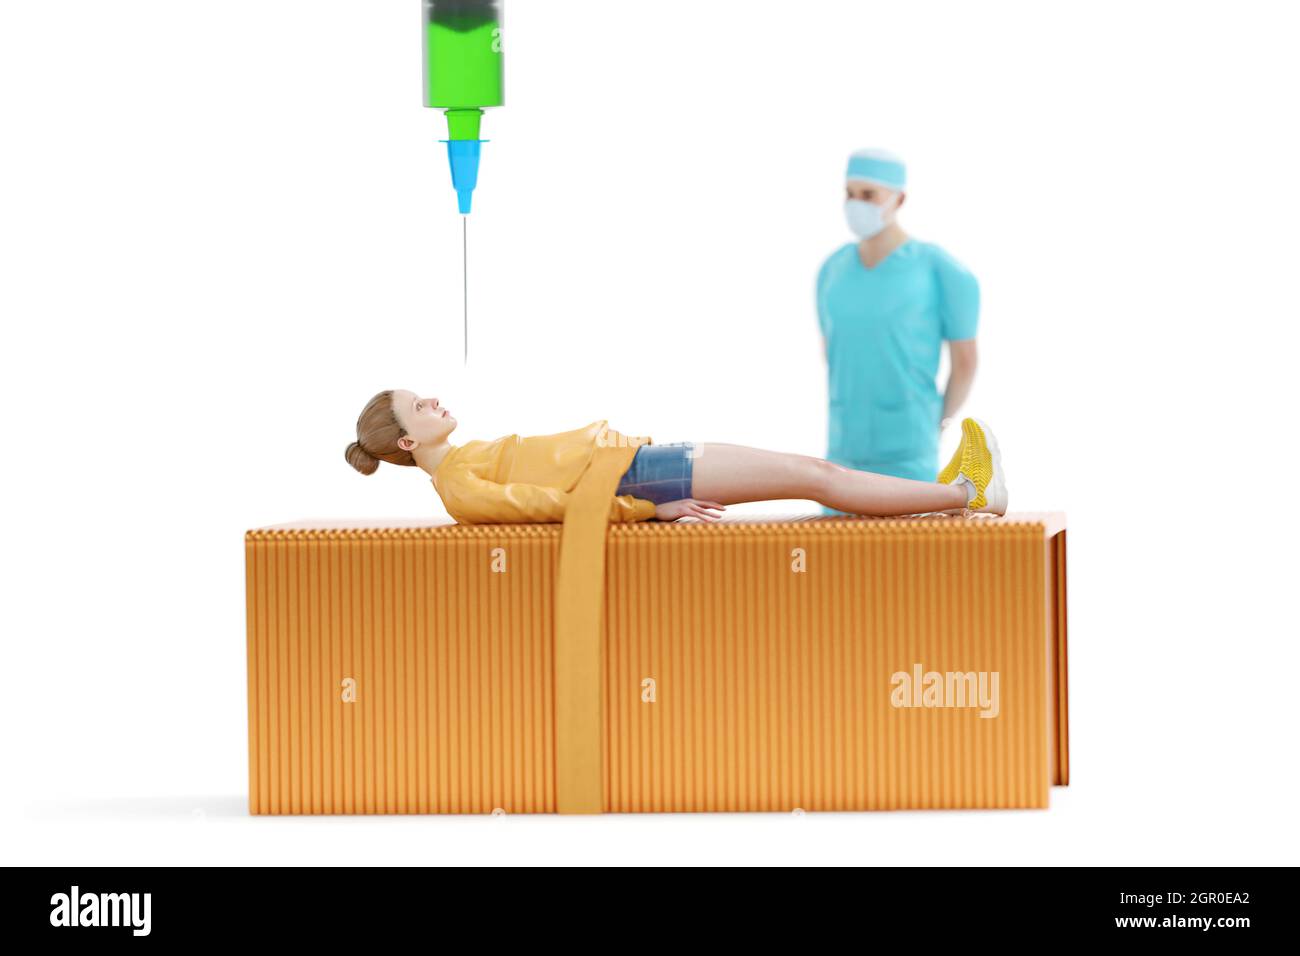 Forced vaccination concept with miniature people, woman tied to bed made out of staples, syringe with green liquid about to inject and medical staff w Stock Photo